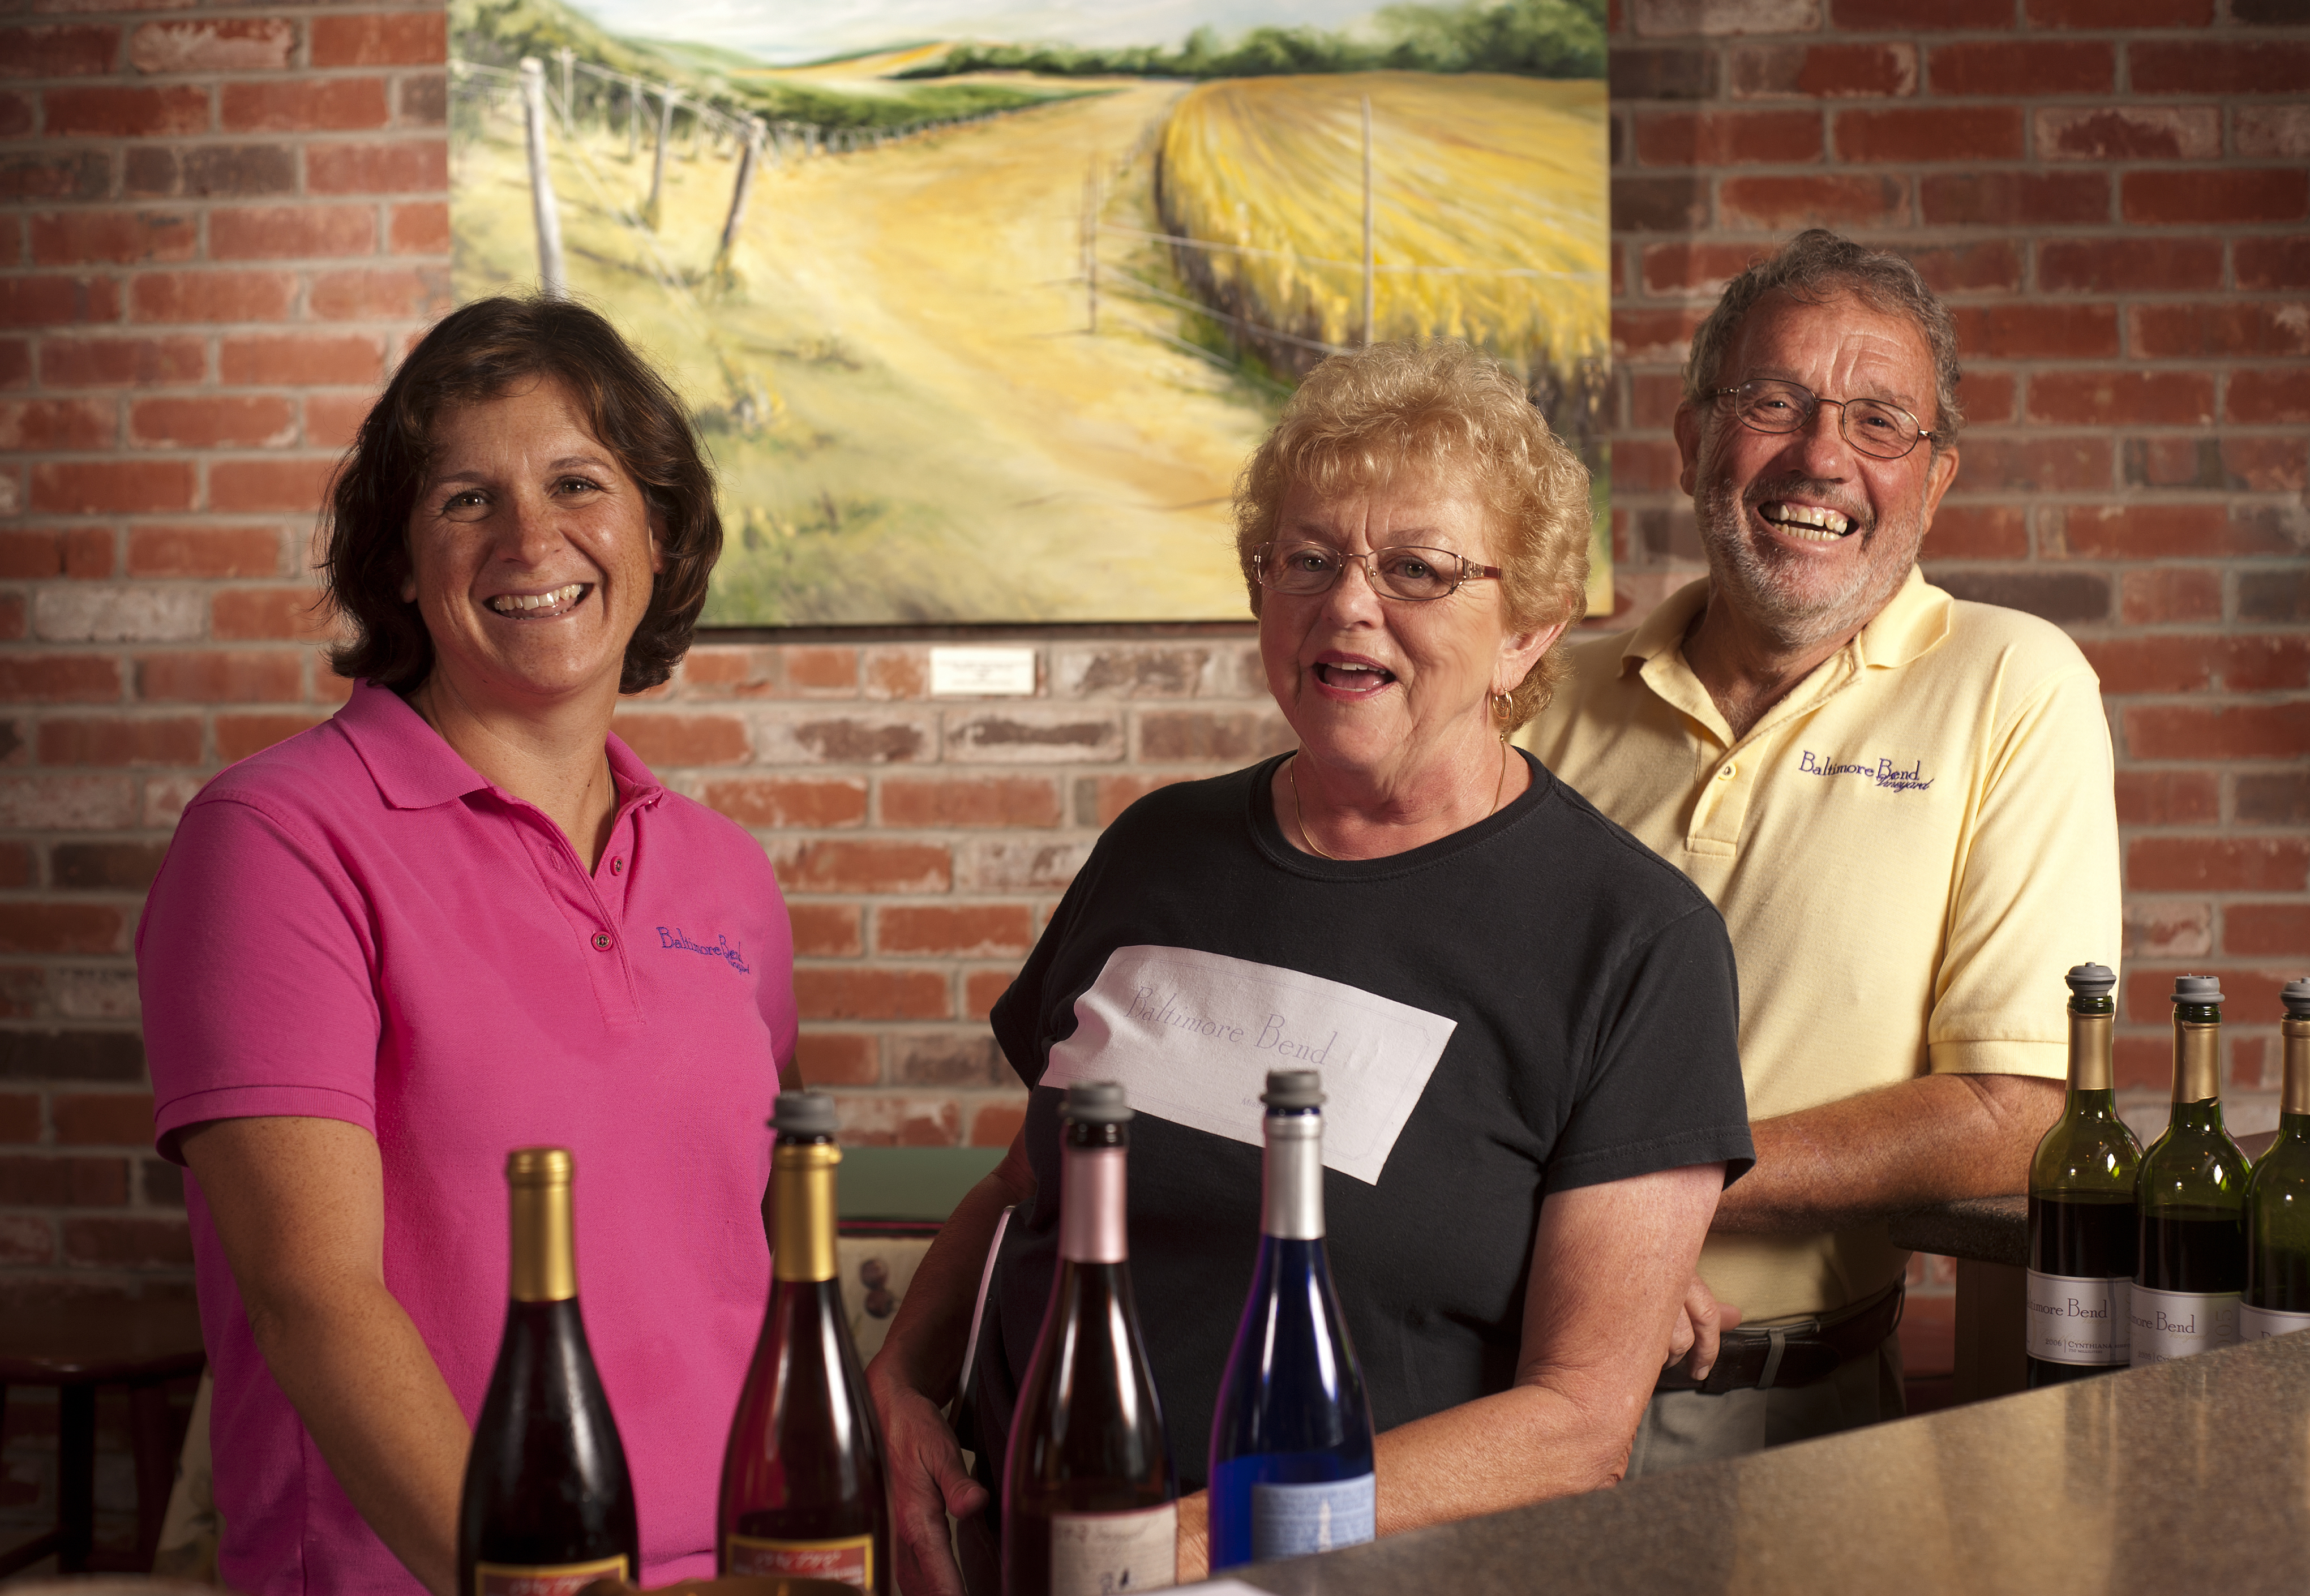 Baltimore Bend Vineyard - indoor photo, three people smiling while standing in front of a bar with wine bottles on it.